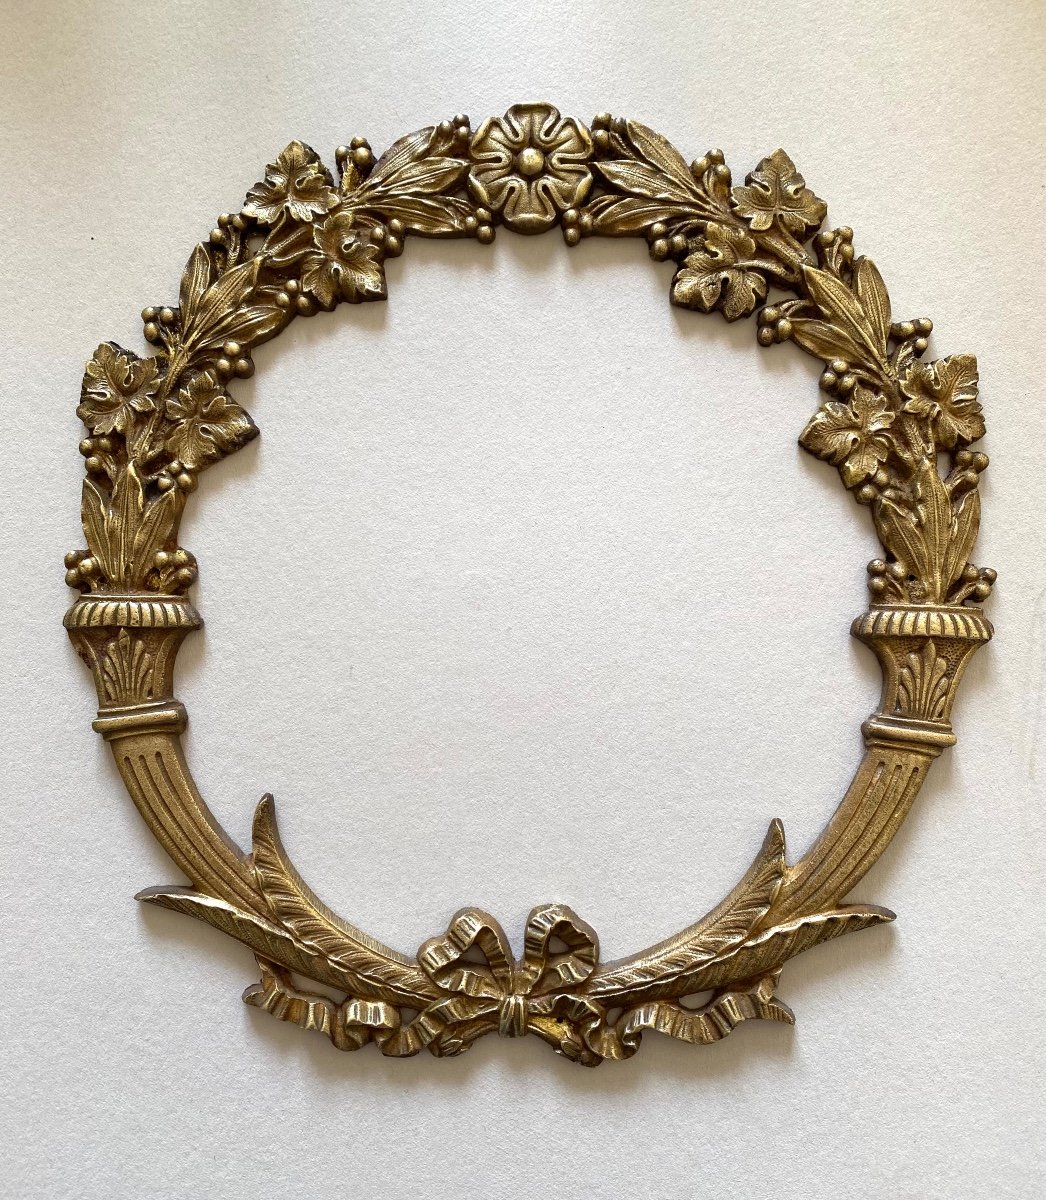 19th Ornamental Bronze In The Shape Of A Crown. Ivy, Laurel And Tied Ribbon.